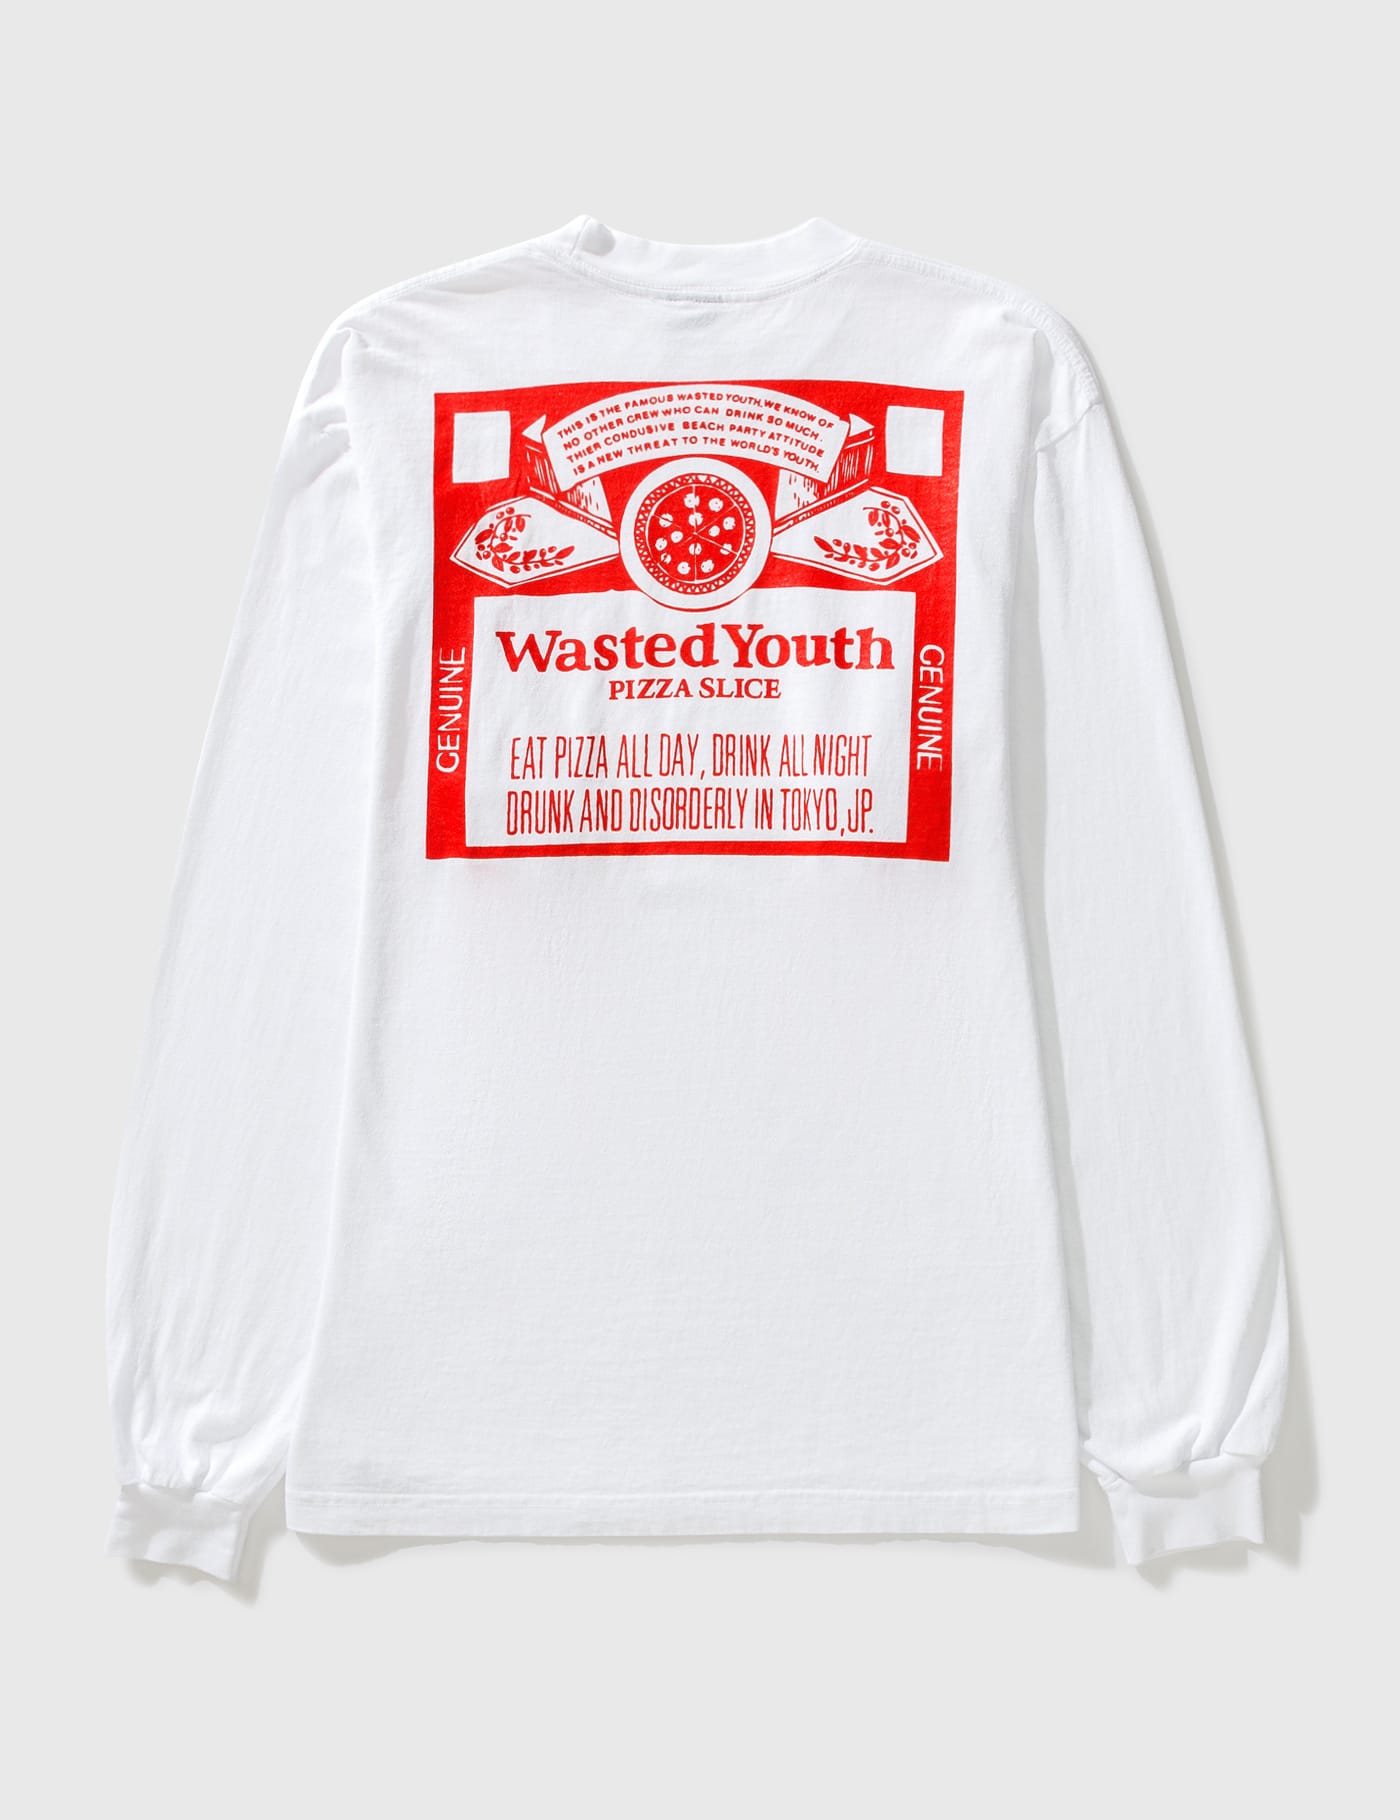 Wasted Youth - Wasted Youth x Pizza Slice ロングスリーブ Tシャツ ...